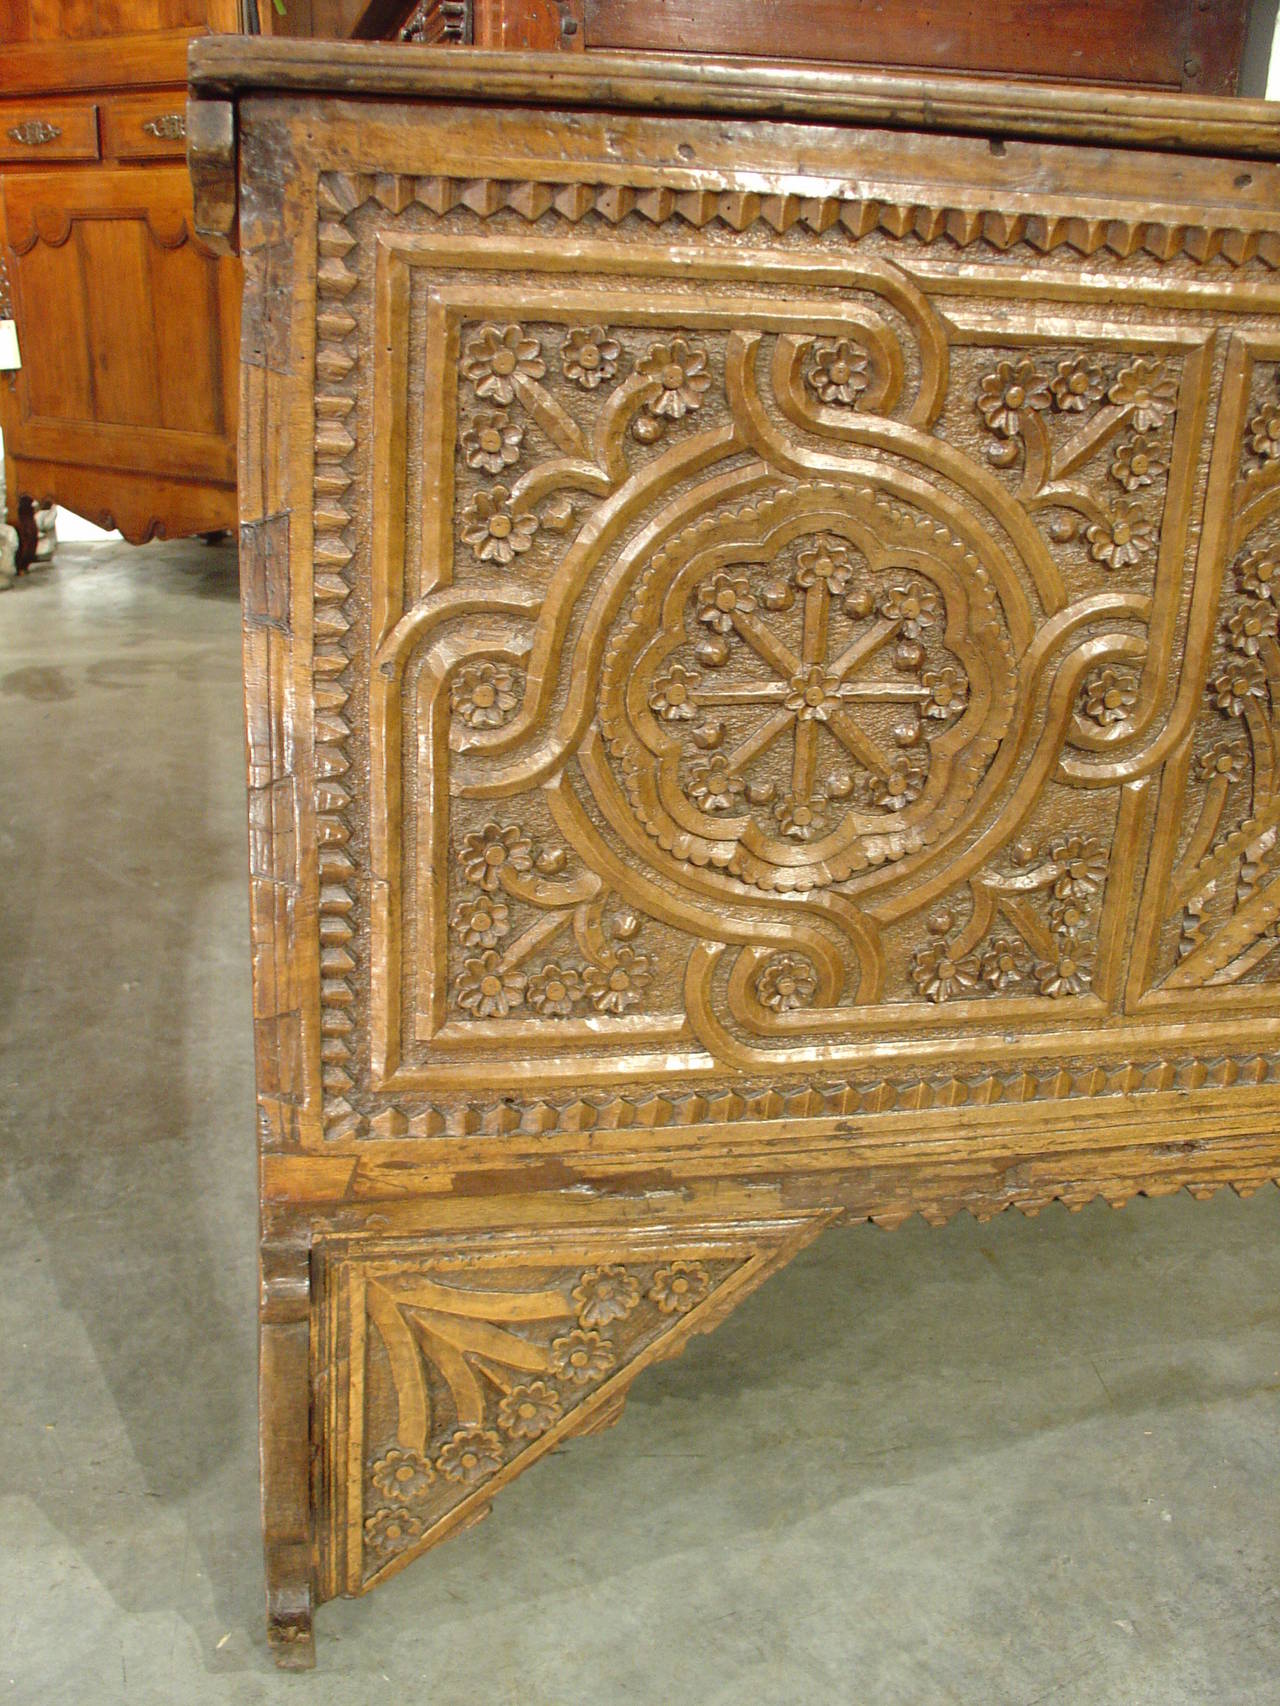 This amazing antique trunk from the 1600’s originated in Seville, Spain.  The entire trunk has been hand carved and joined together.  The front has three panels with a myriad of motifs.  The center panel is in perspective with columns, arches and